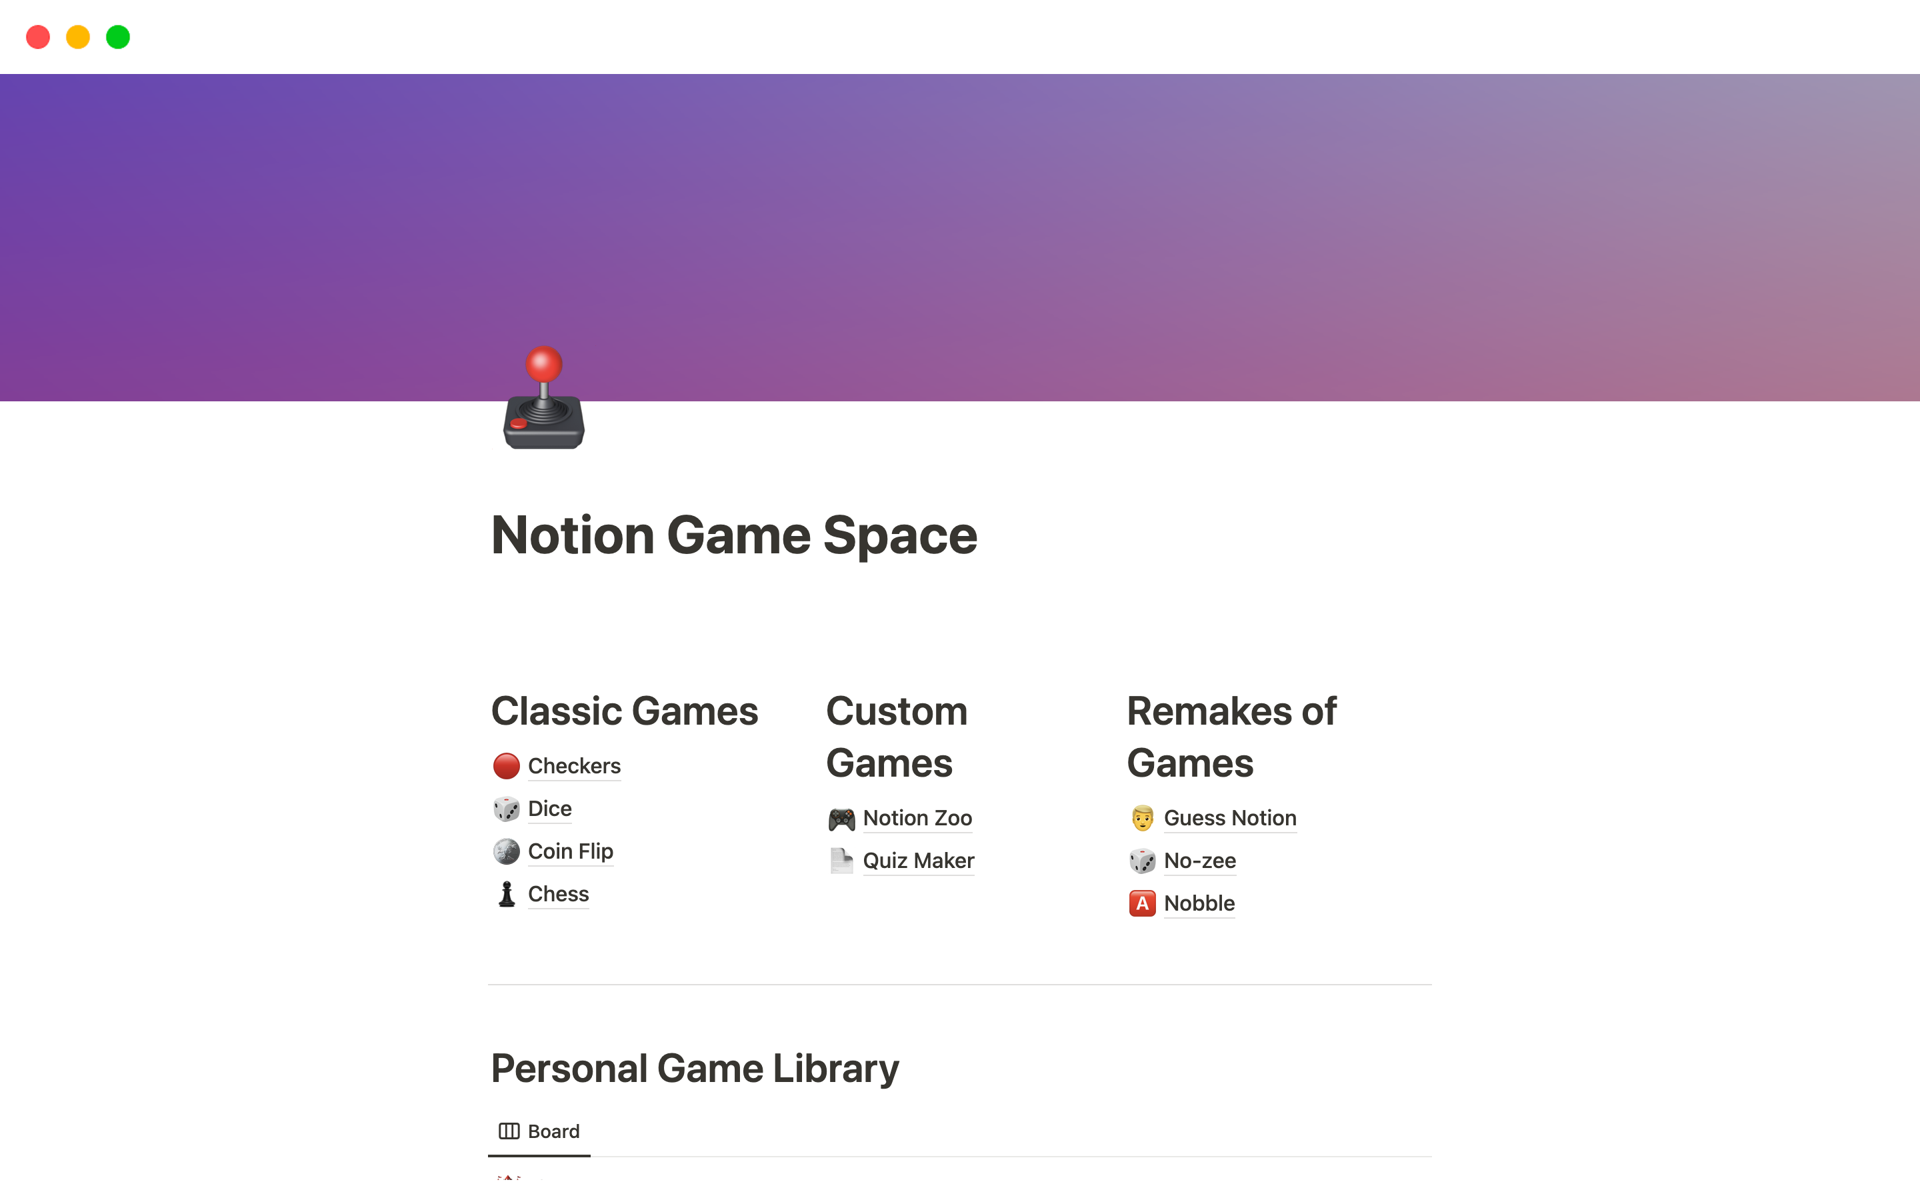 Notion Game Space allows you to play games and keep track of games that you have played.